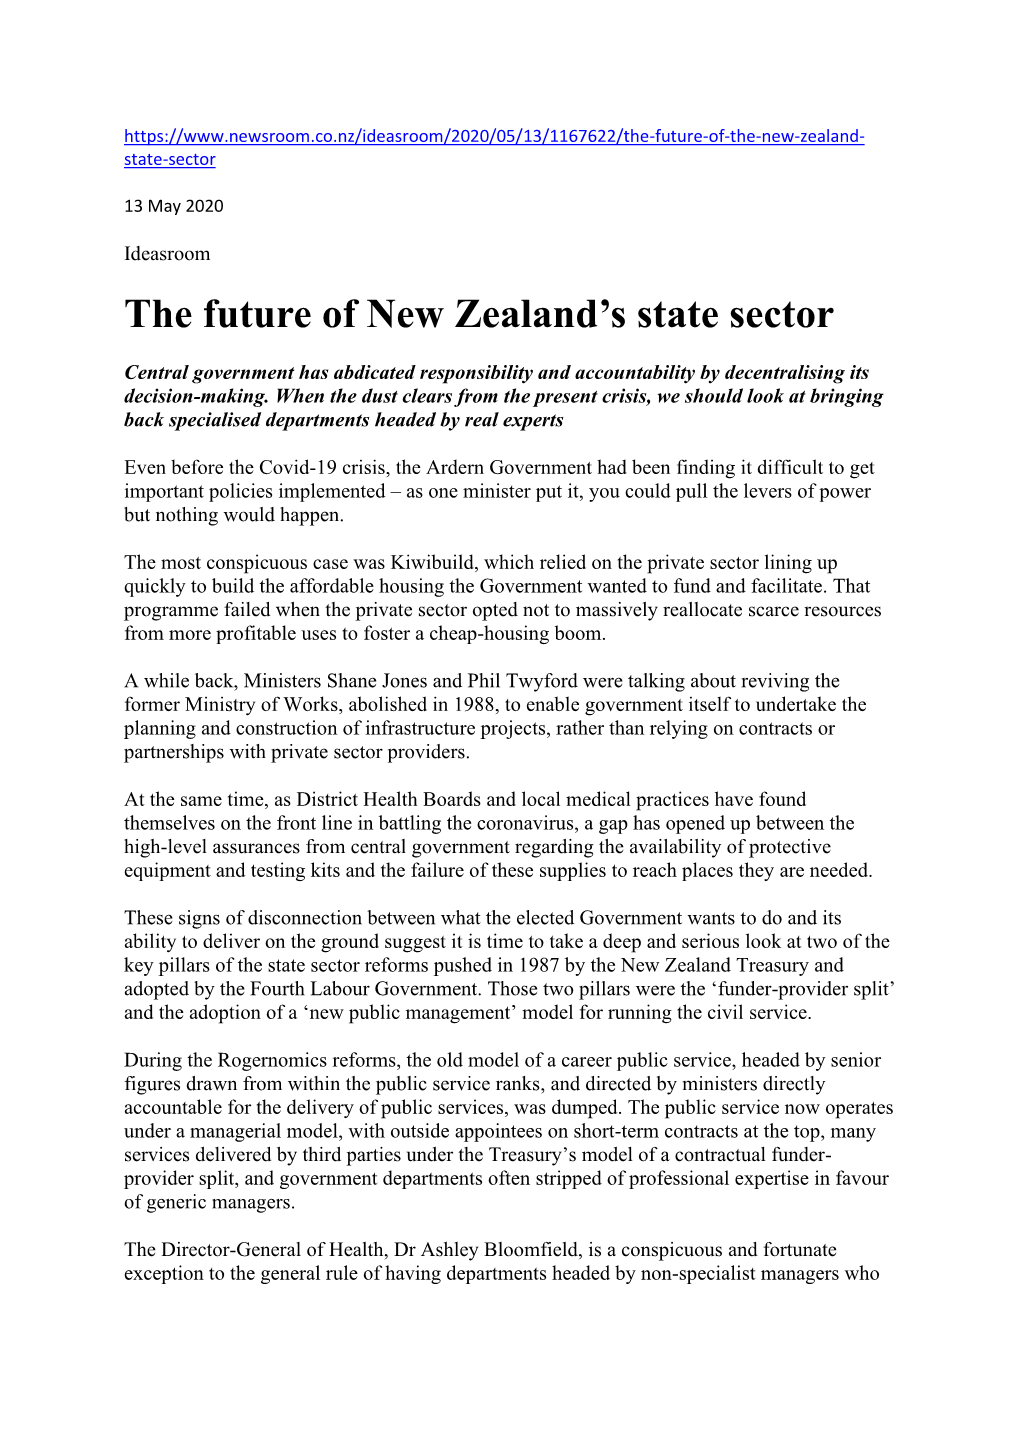 The Future of New Zealand's State Sector